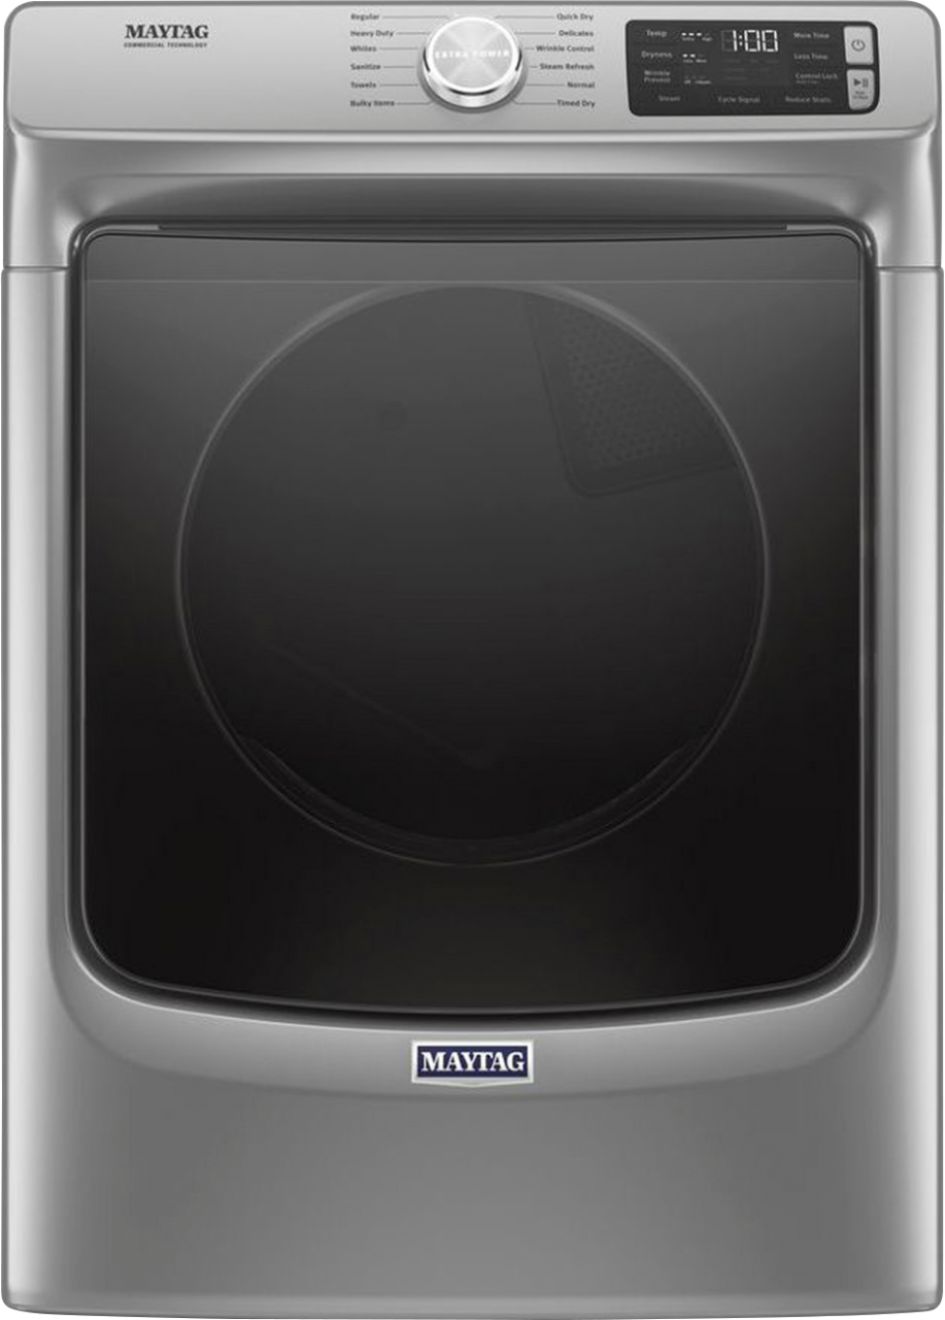 Maytag - 7.3 Cu. Ft. 12-Cycle High-Efficiency Electric Dryer with Steam - Metallic Slate